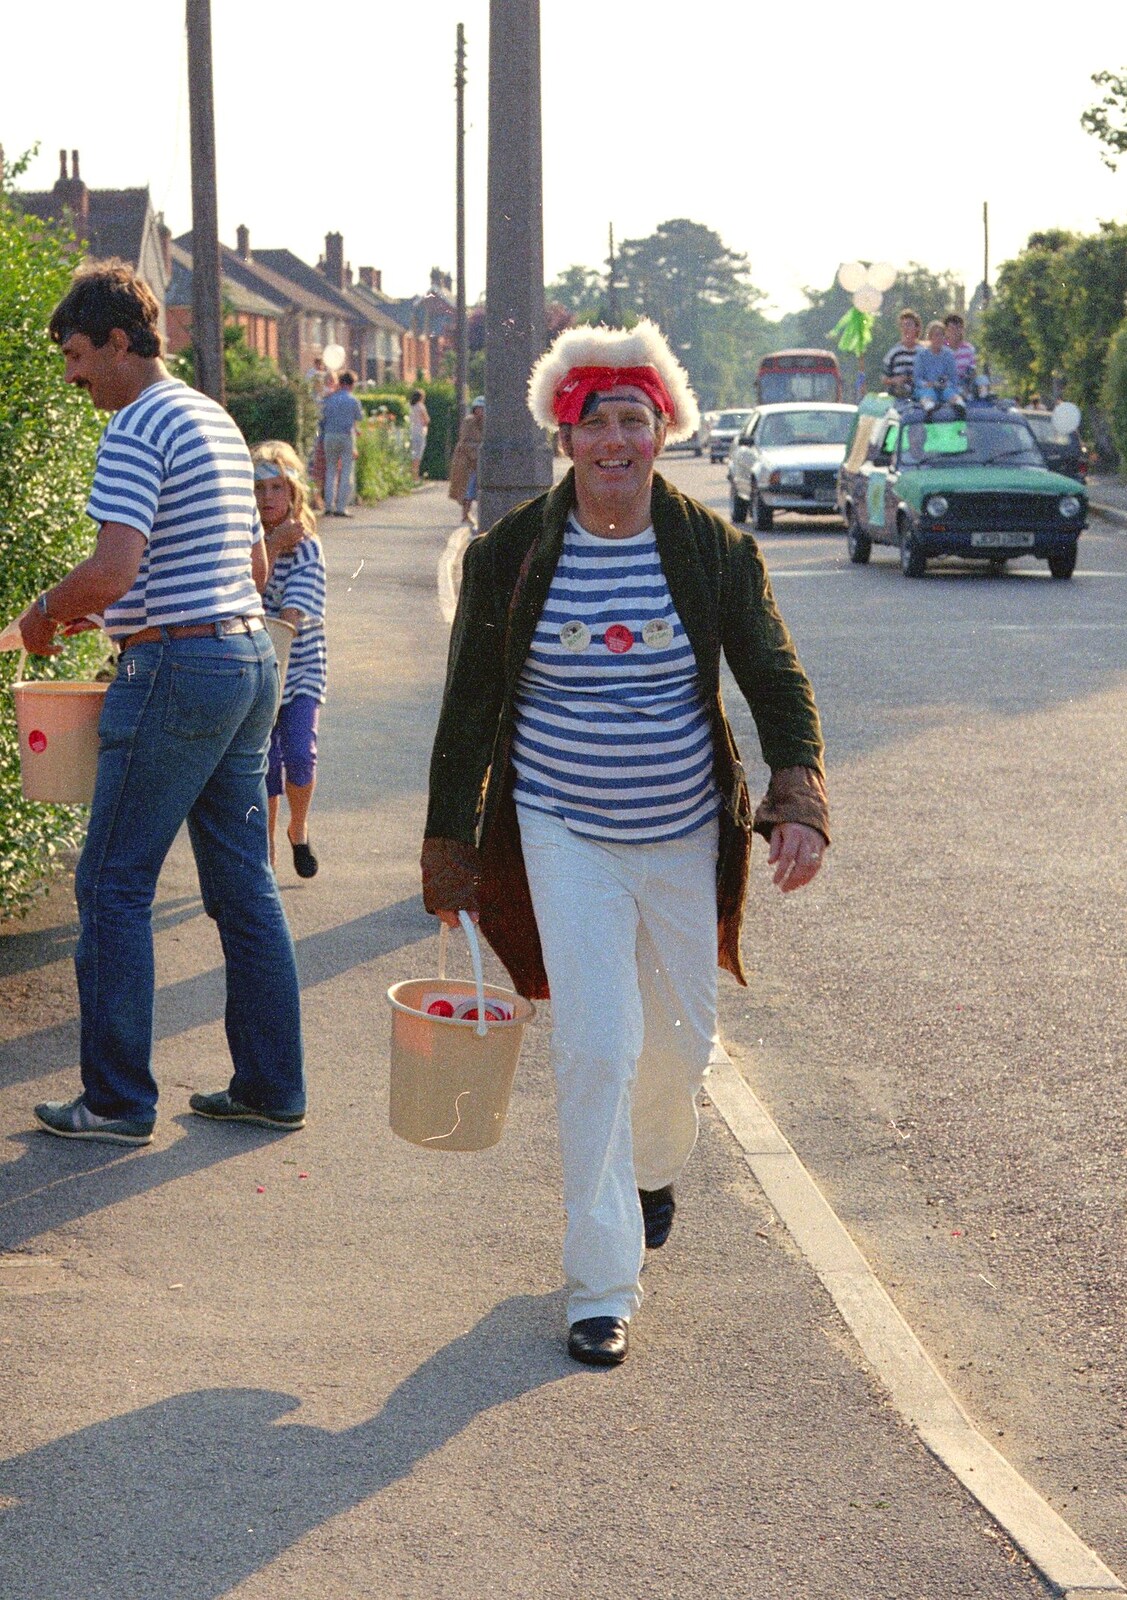 One of the McStones posse dressed as a pirate from Sean and the New Milton Carnival, Hampshire - 1st August 1986